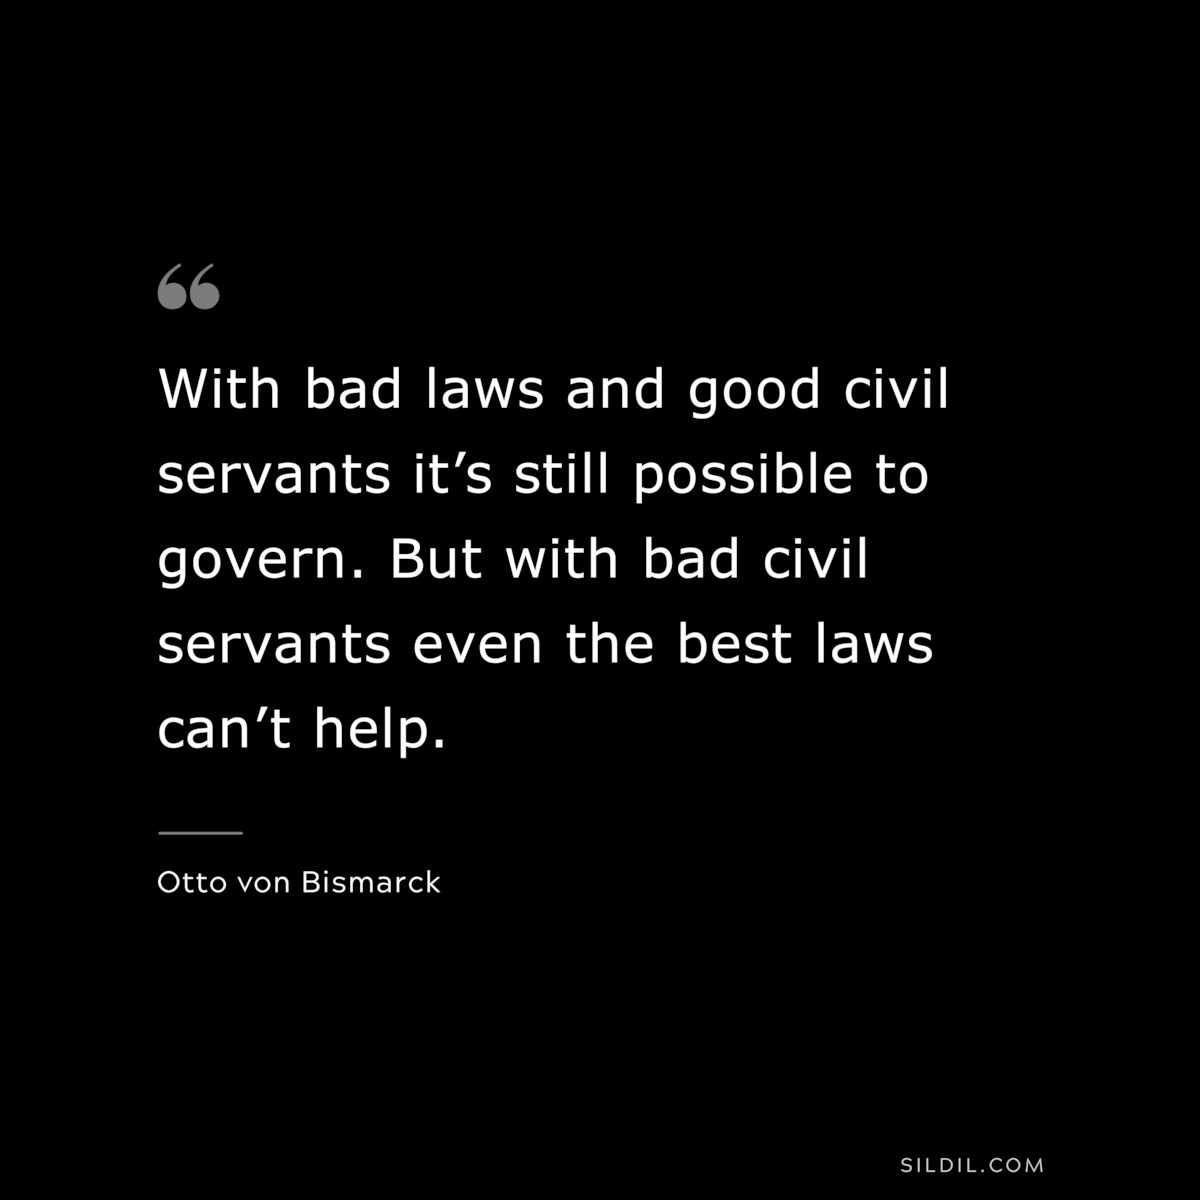 With bad laws and good civil servants it’s still possible to govern. But with bad civil servants even the best laws can’t help. ― Otto von Bismarck